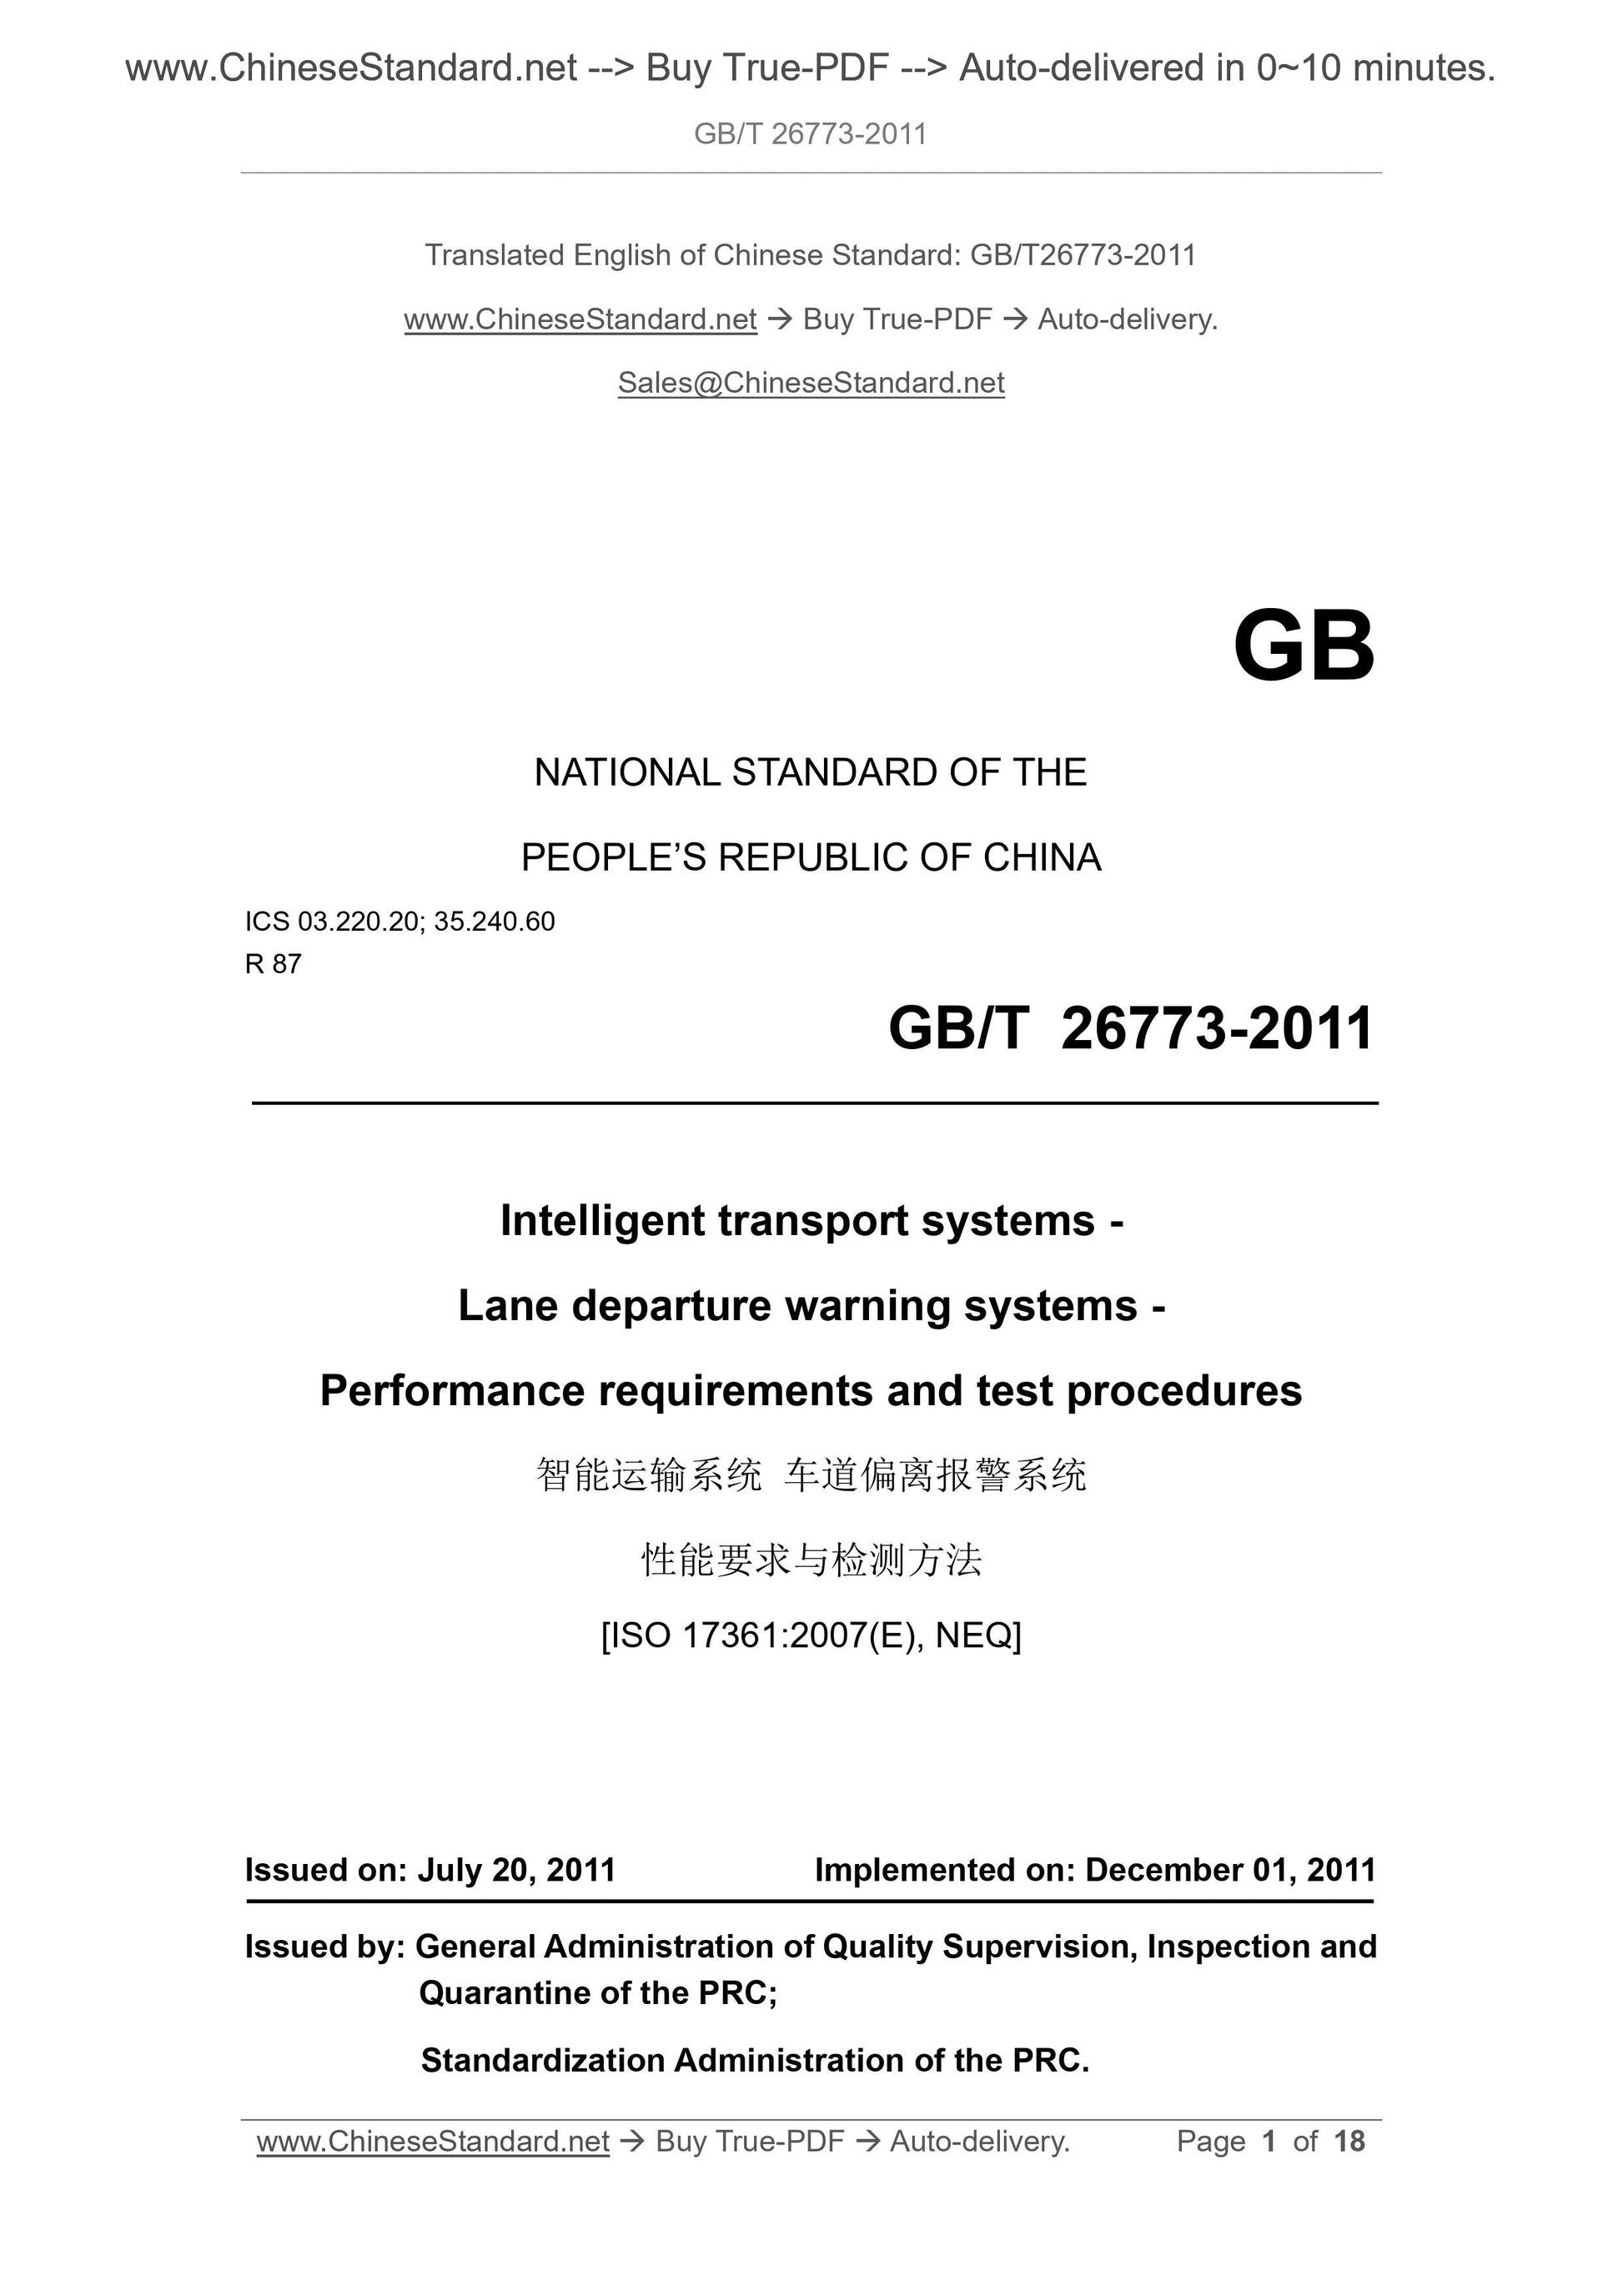 GB/T 26773-2011 Page 1